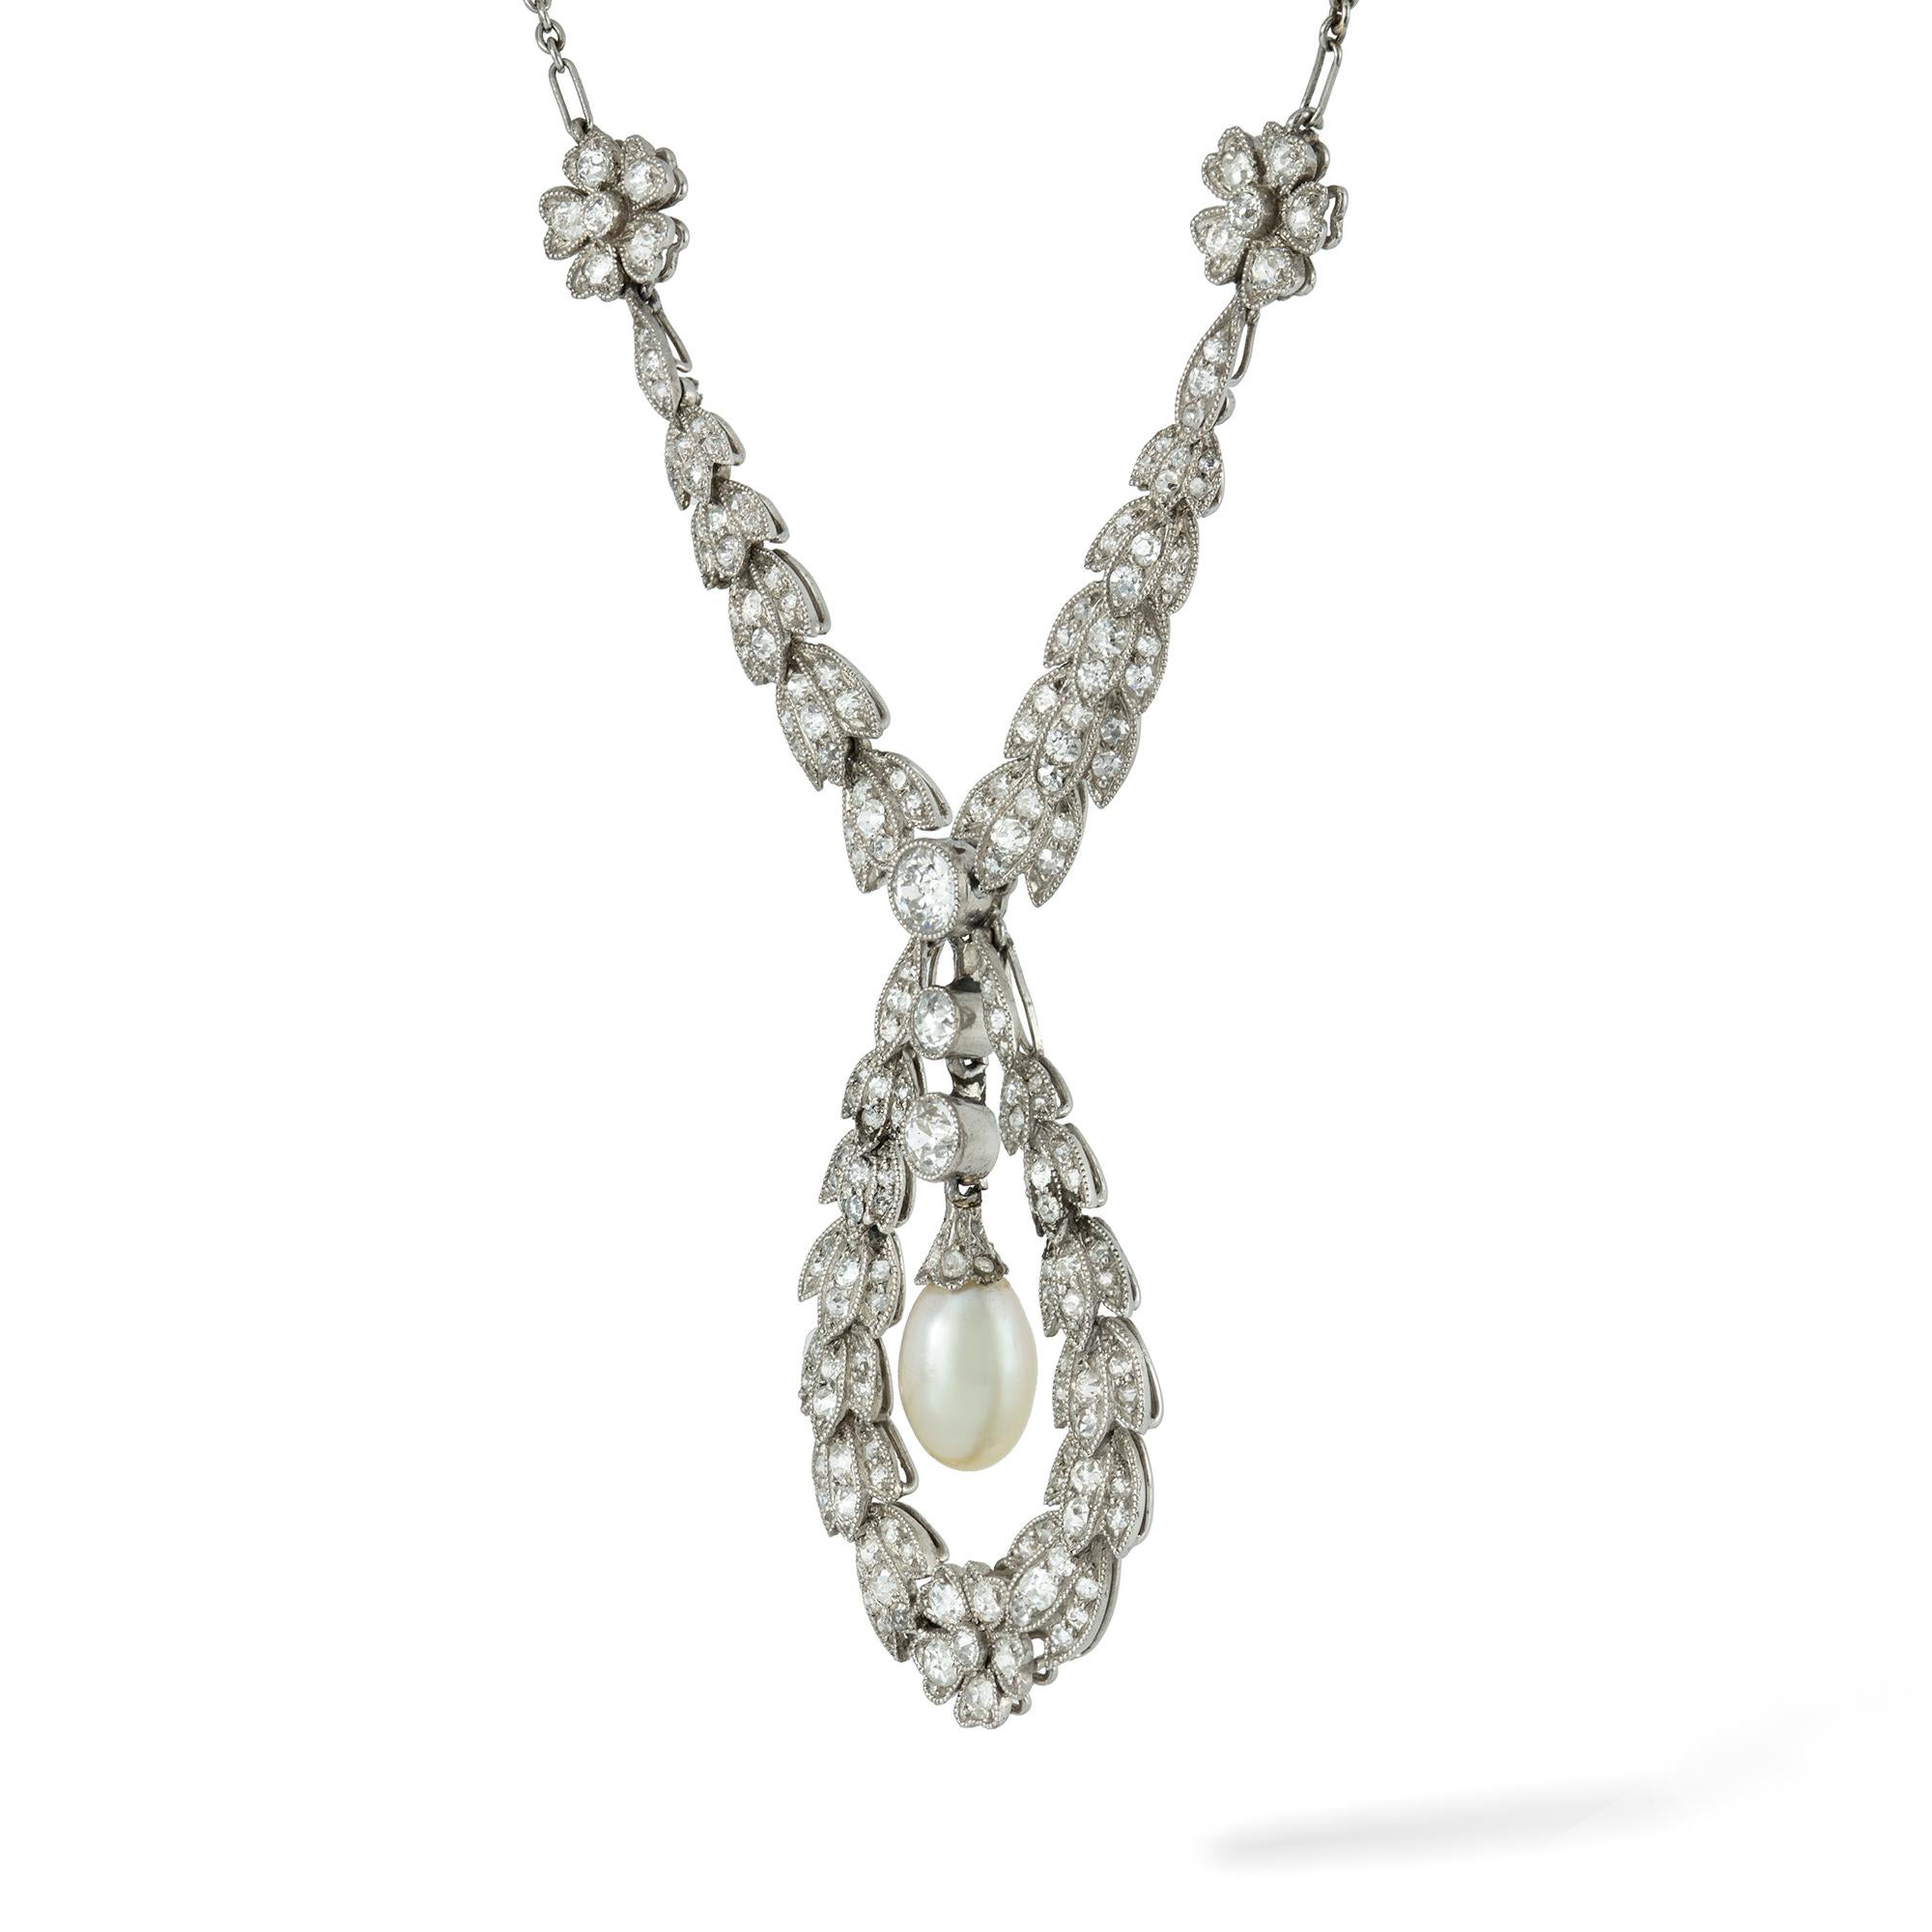 An Edwardian pearl and diamond necklace, the necklace comprising a principle garland drop, suspending an oval pearl measuring aproximately 8.2 x 5.6mm,  to the centre of a diamond-set laurel leaf cluster, the two outer drops suspended from a